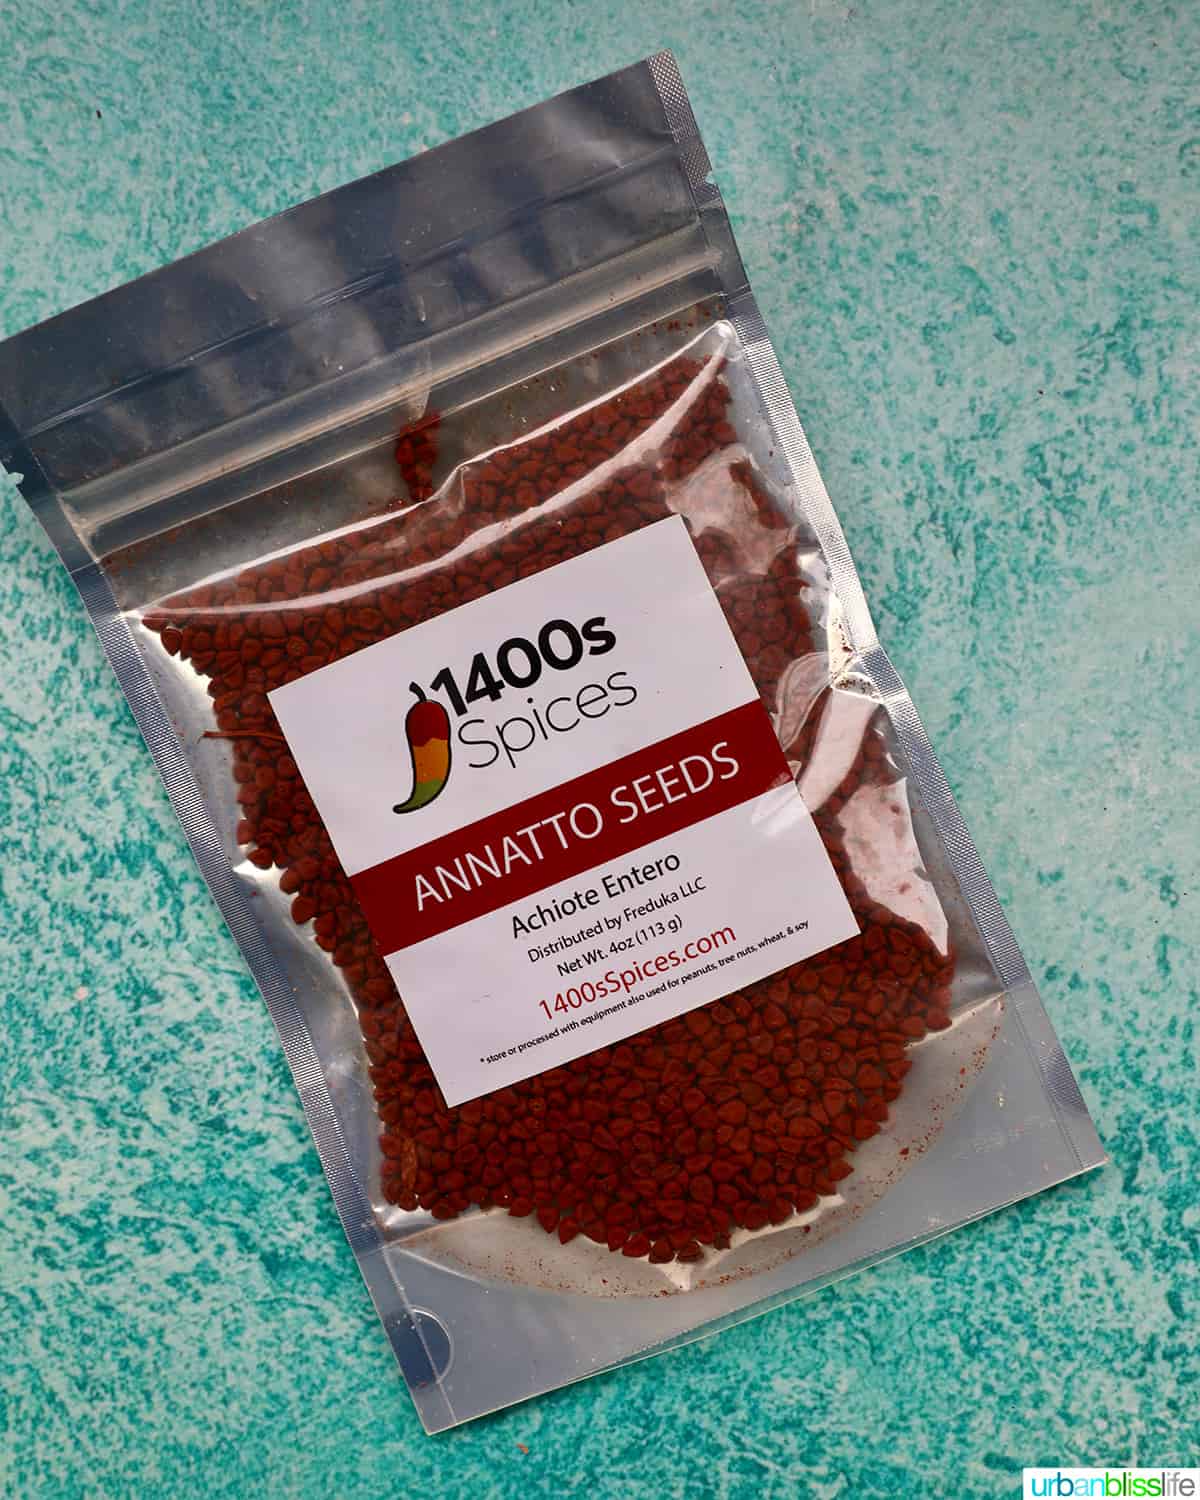 packet of annatto seeds on a blue background.